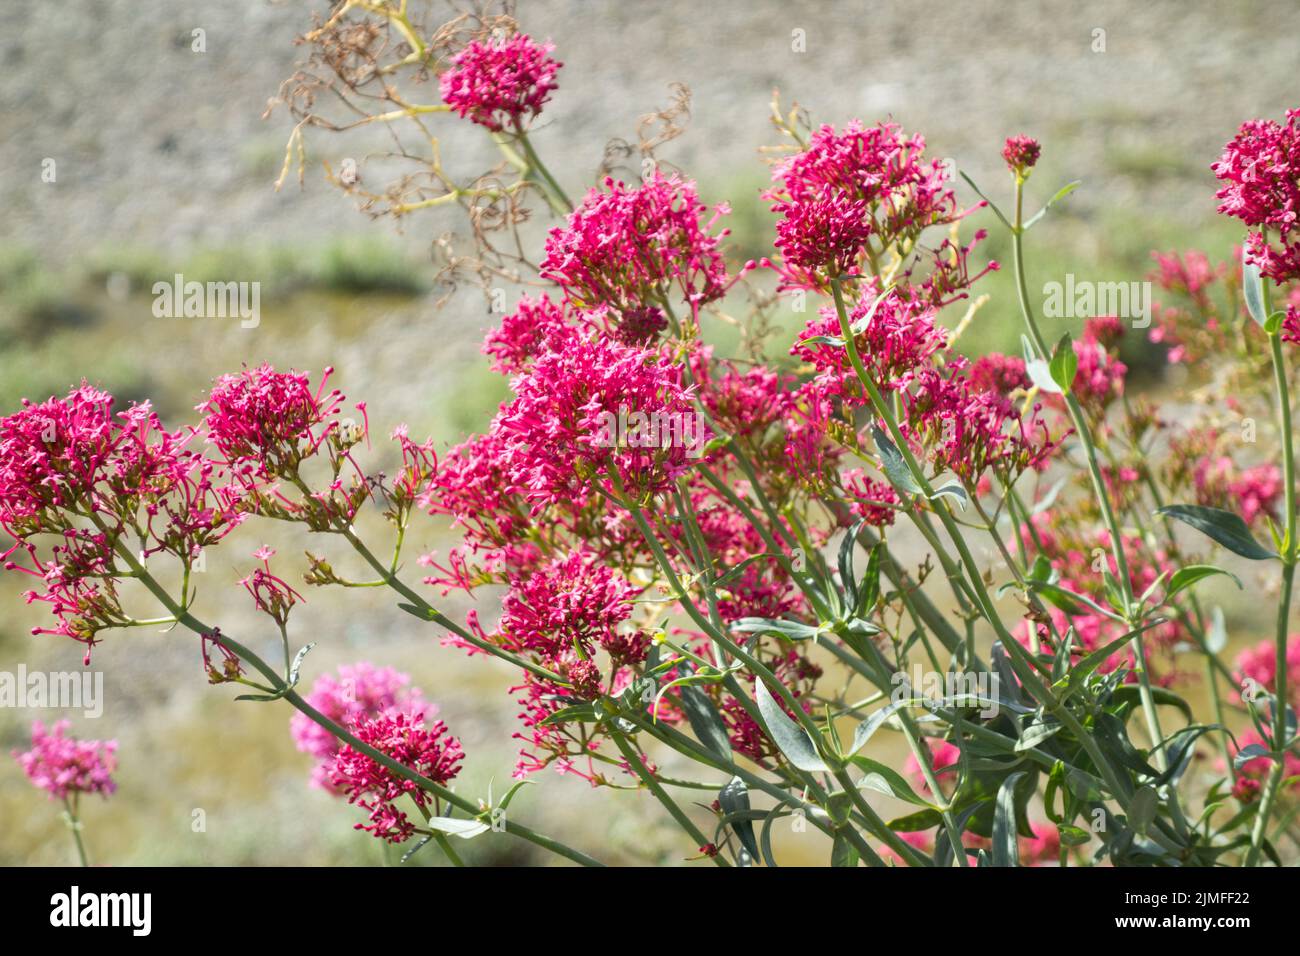 Red Valerian Plants (Centranthus ruber) on the banks of the River Thames in southwest London, England, UK Stock Photo